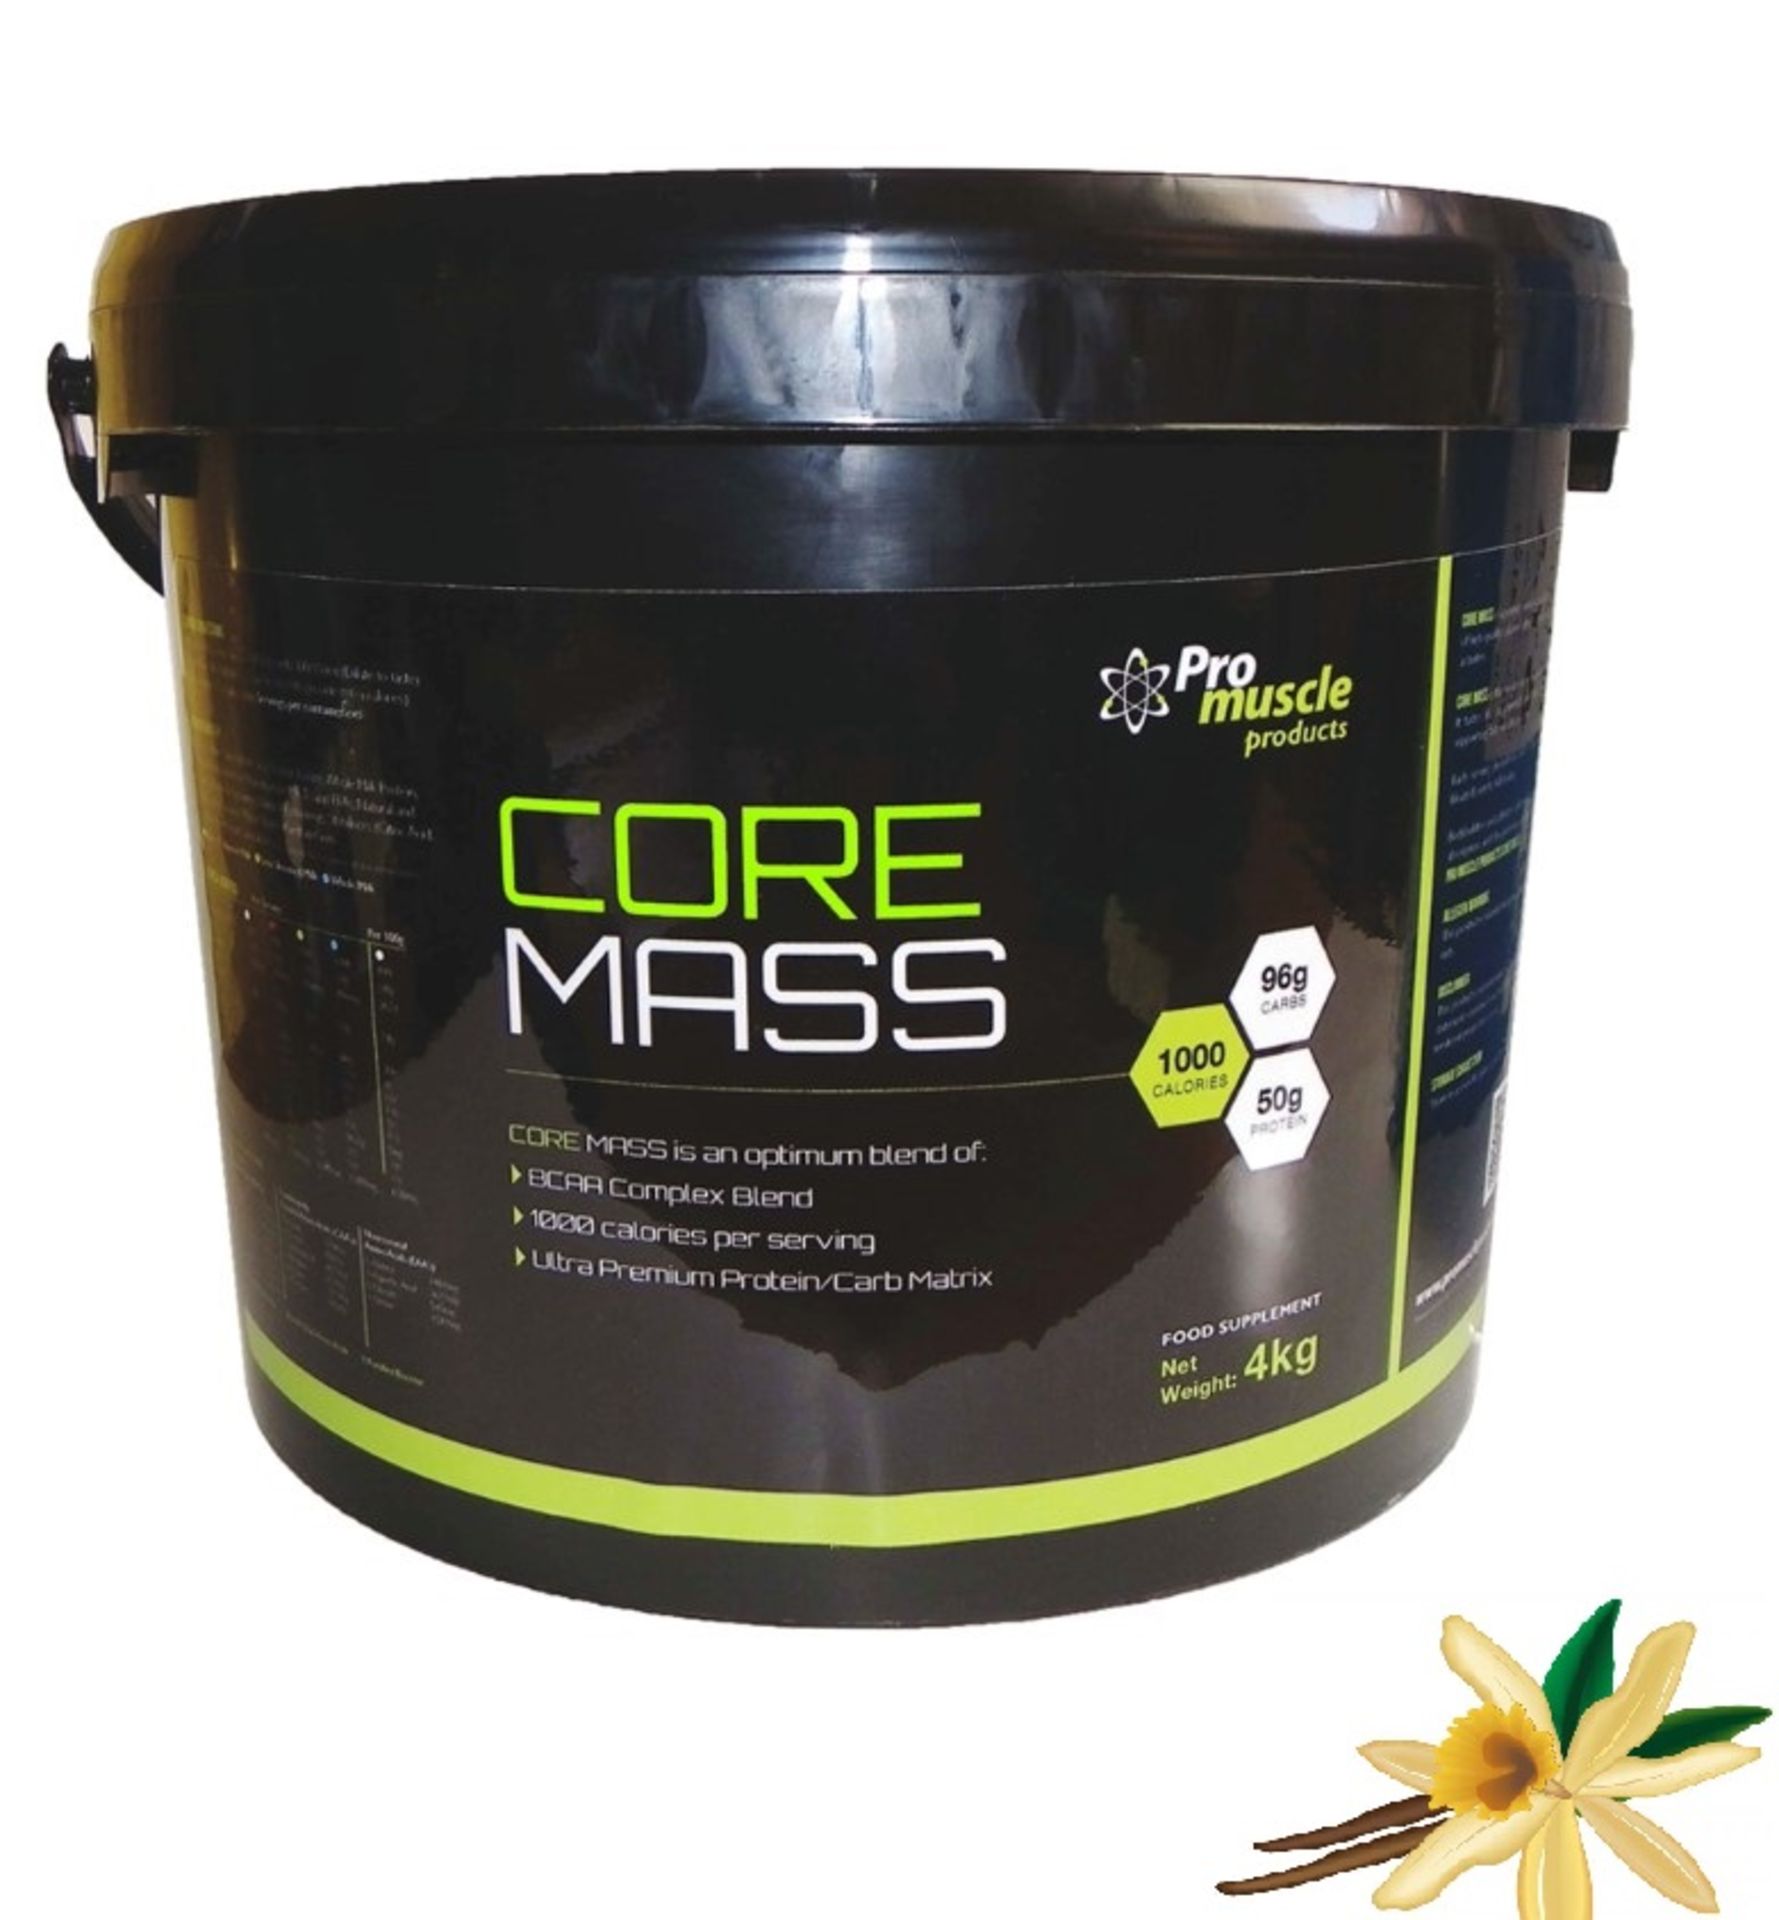 1 x Pro Muscle CORE MASS GAINER Food Supplement (4KG) - Flavour: Vanilla - New Sealed Stock - Best